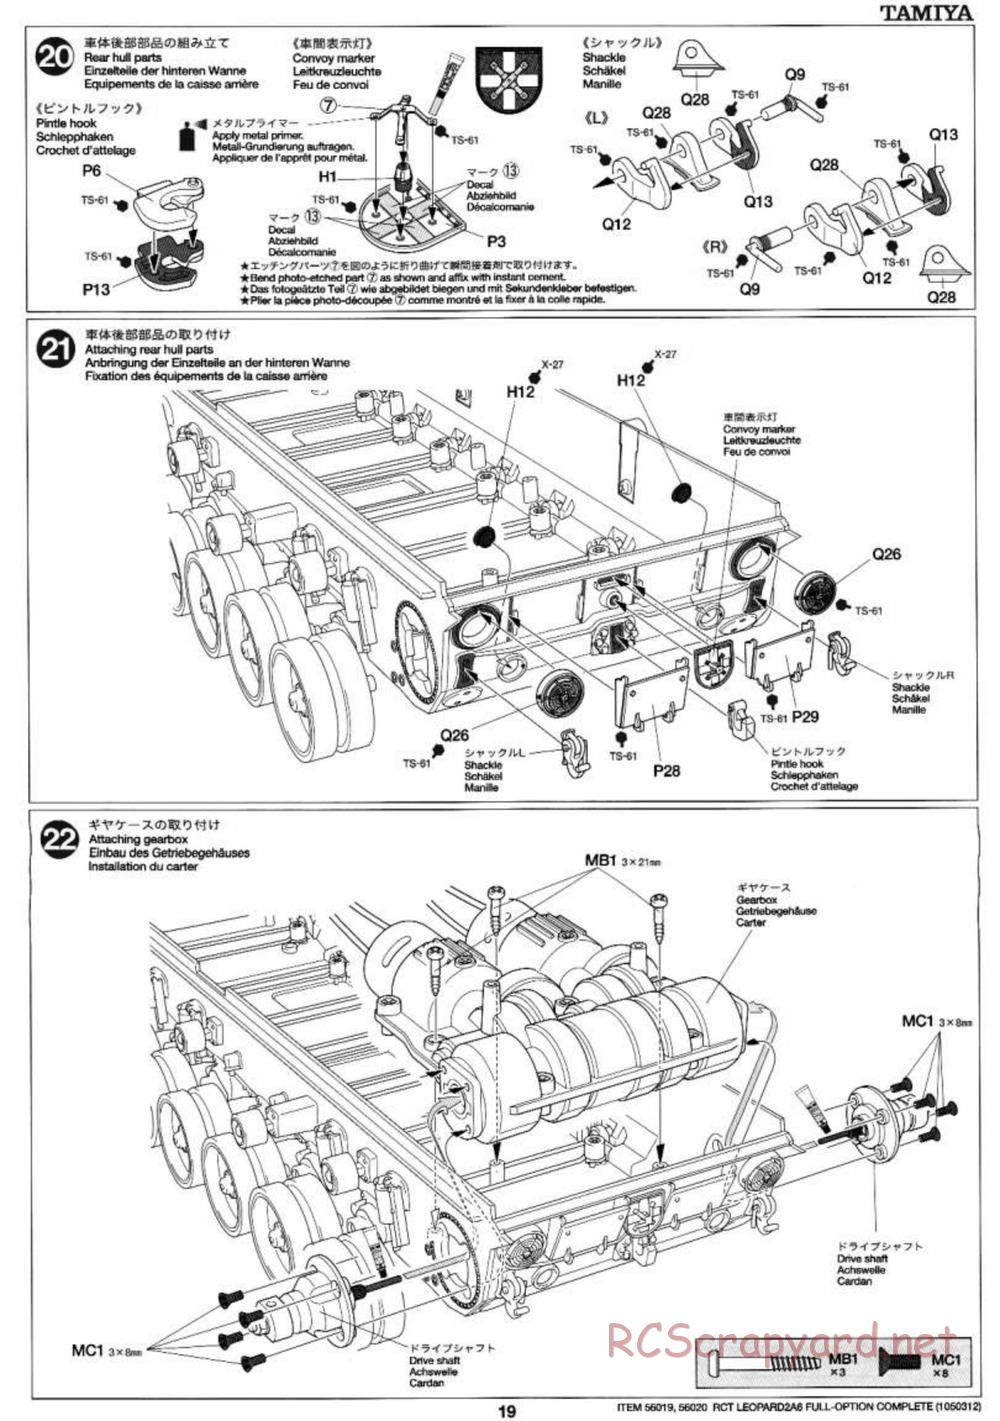 Tamiya - Leopard 2 A6 - 1/16 Scale Chassis - Manual - Page 19